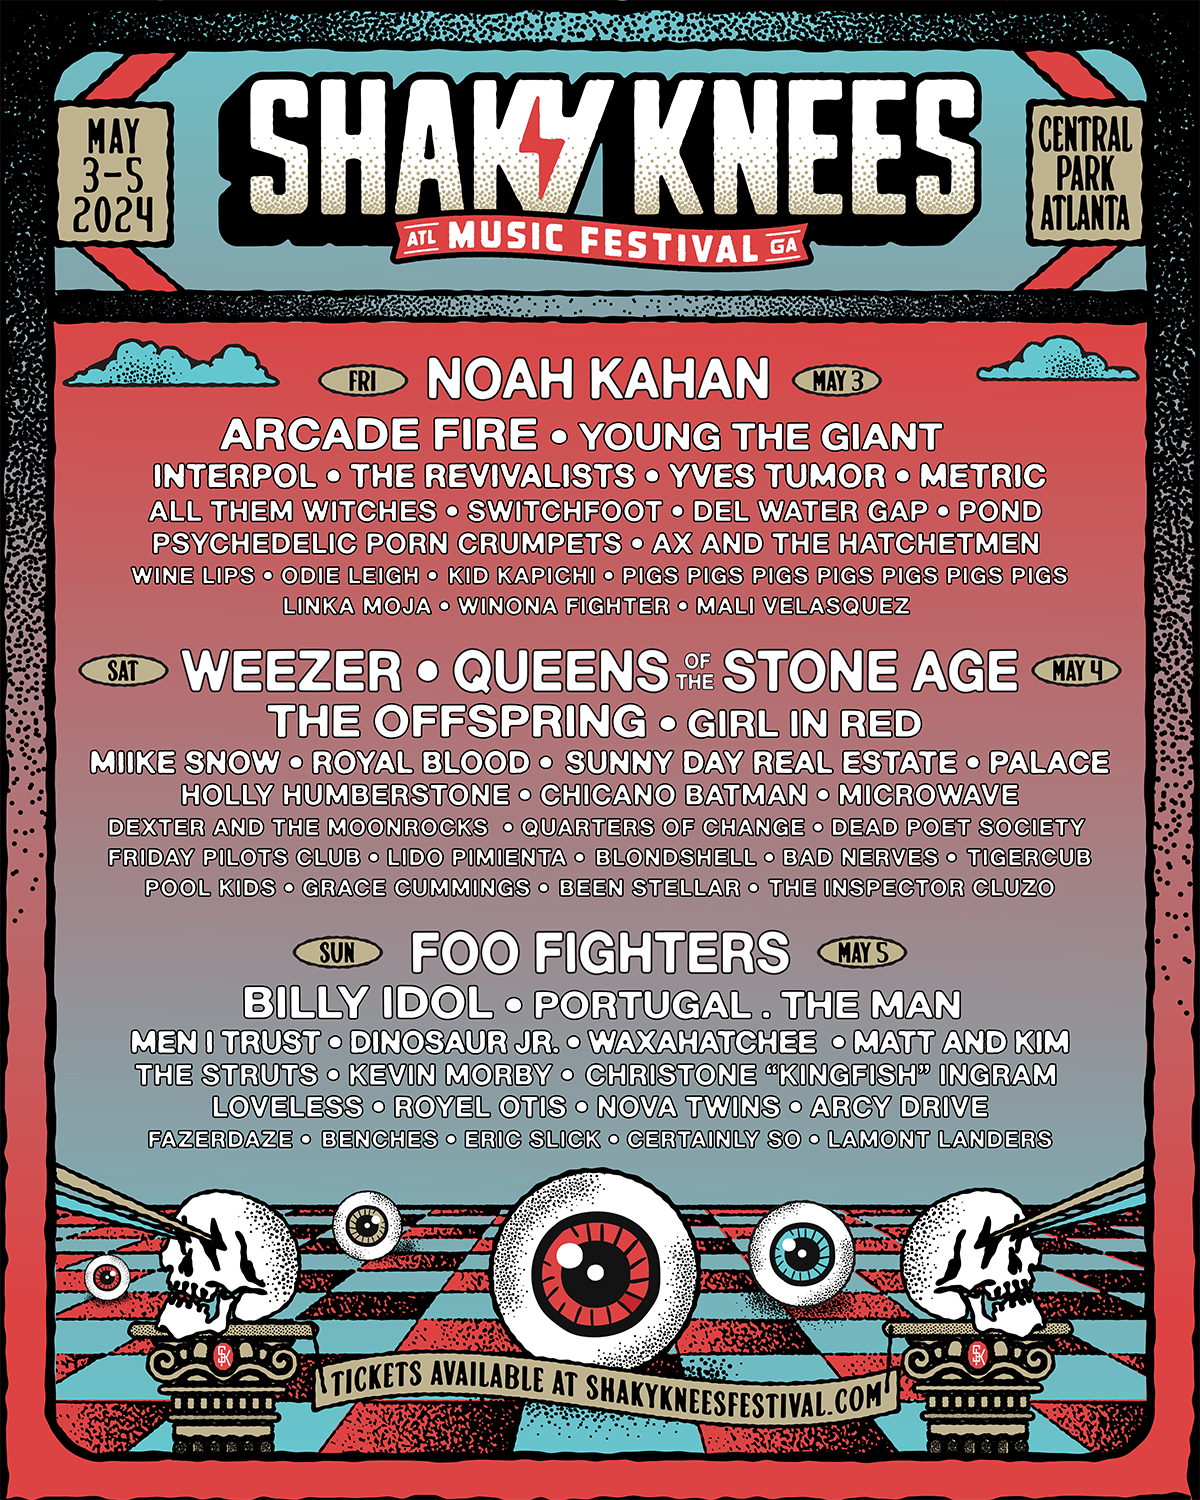 Shaky Knees 2024 Lineup: Foo Fighters, Noah Kahan, Weezer, Queens of the Stone Age, Arcade Fire, Young the Giant, The Offspring, girl in red, Billy Idol, Portugal. The Man, Interpol, The Revivalists, Yves Tumor, Metric, Miike Snow, Royal Blood, Sunny